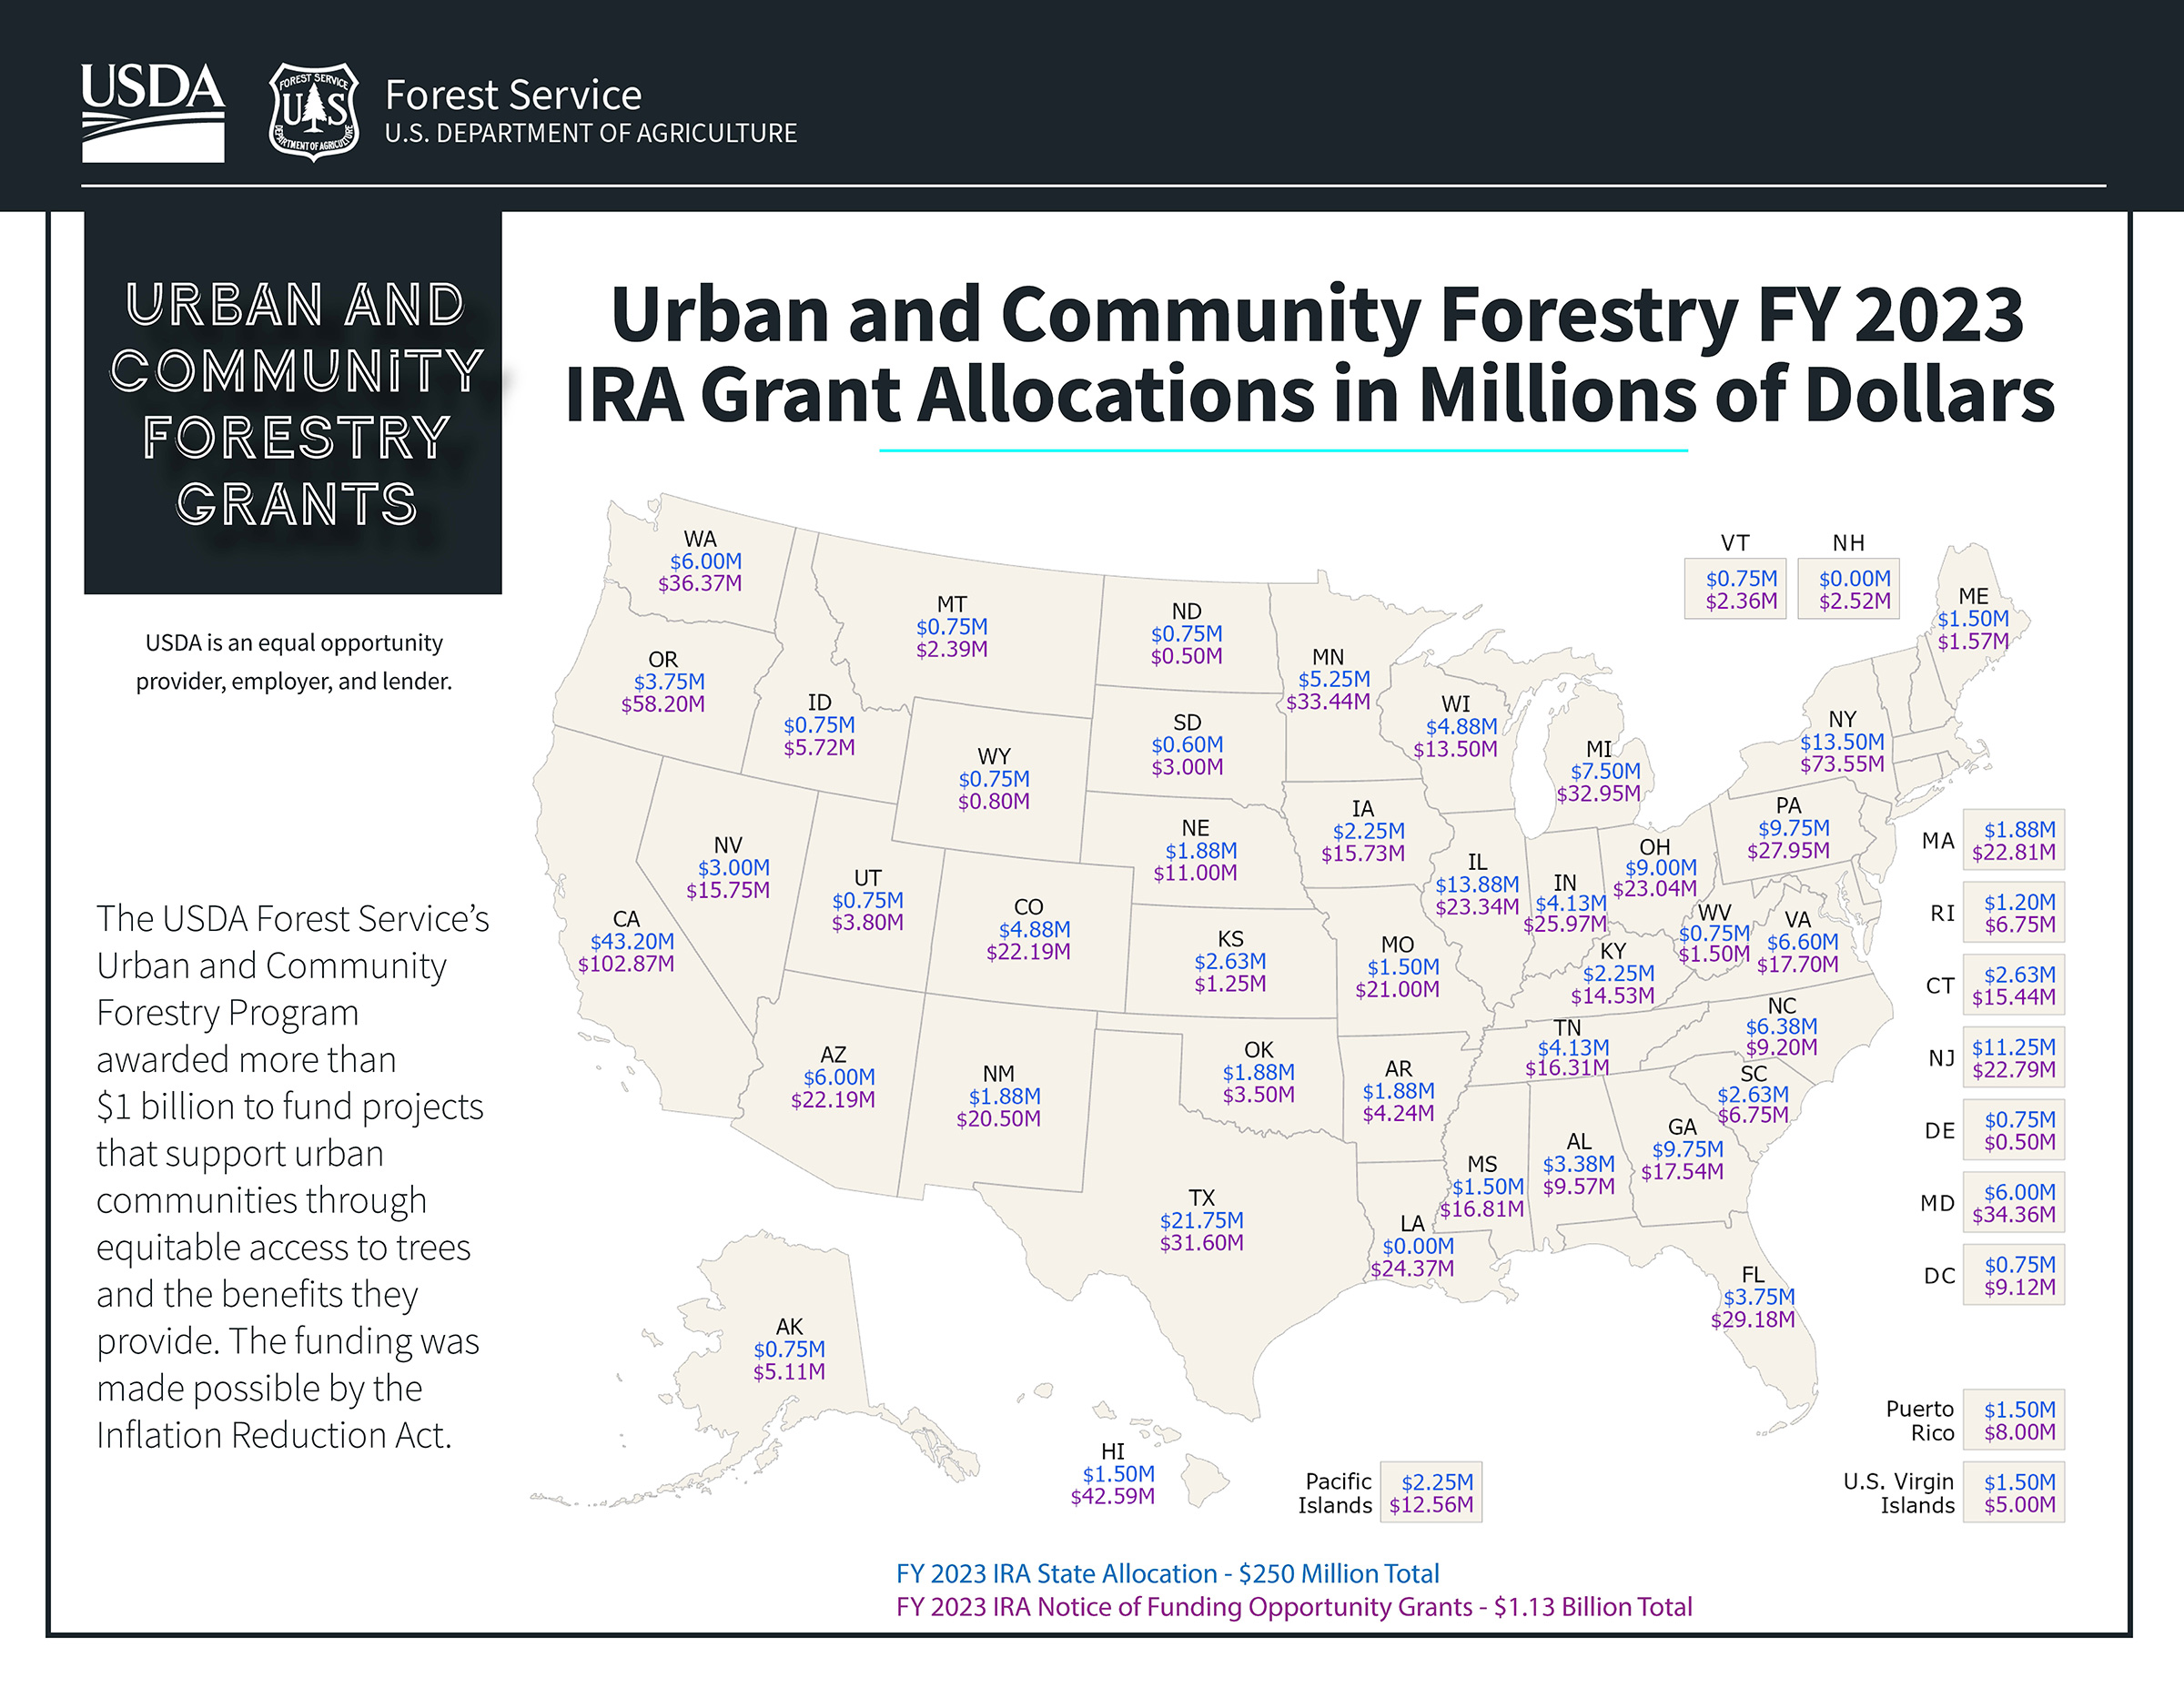 Urban and Community Forestry FY 2023 IRA Grant Allocations in Millions of Dollars - map.